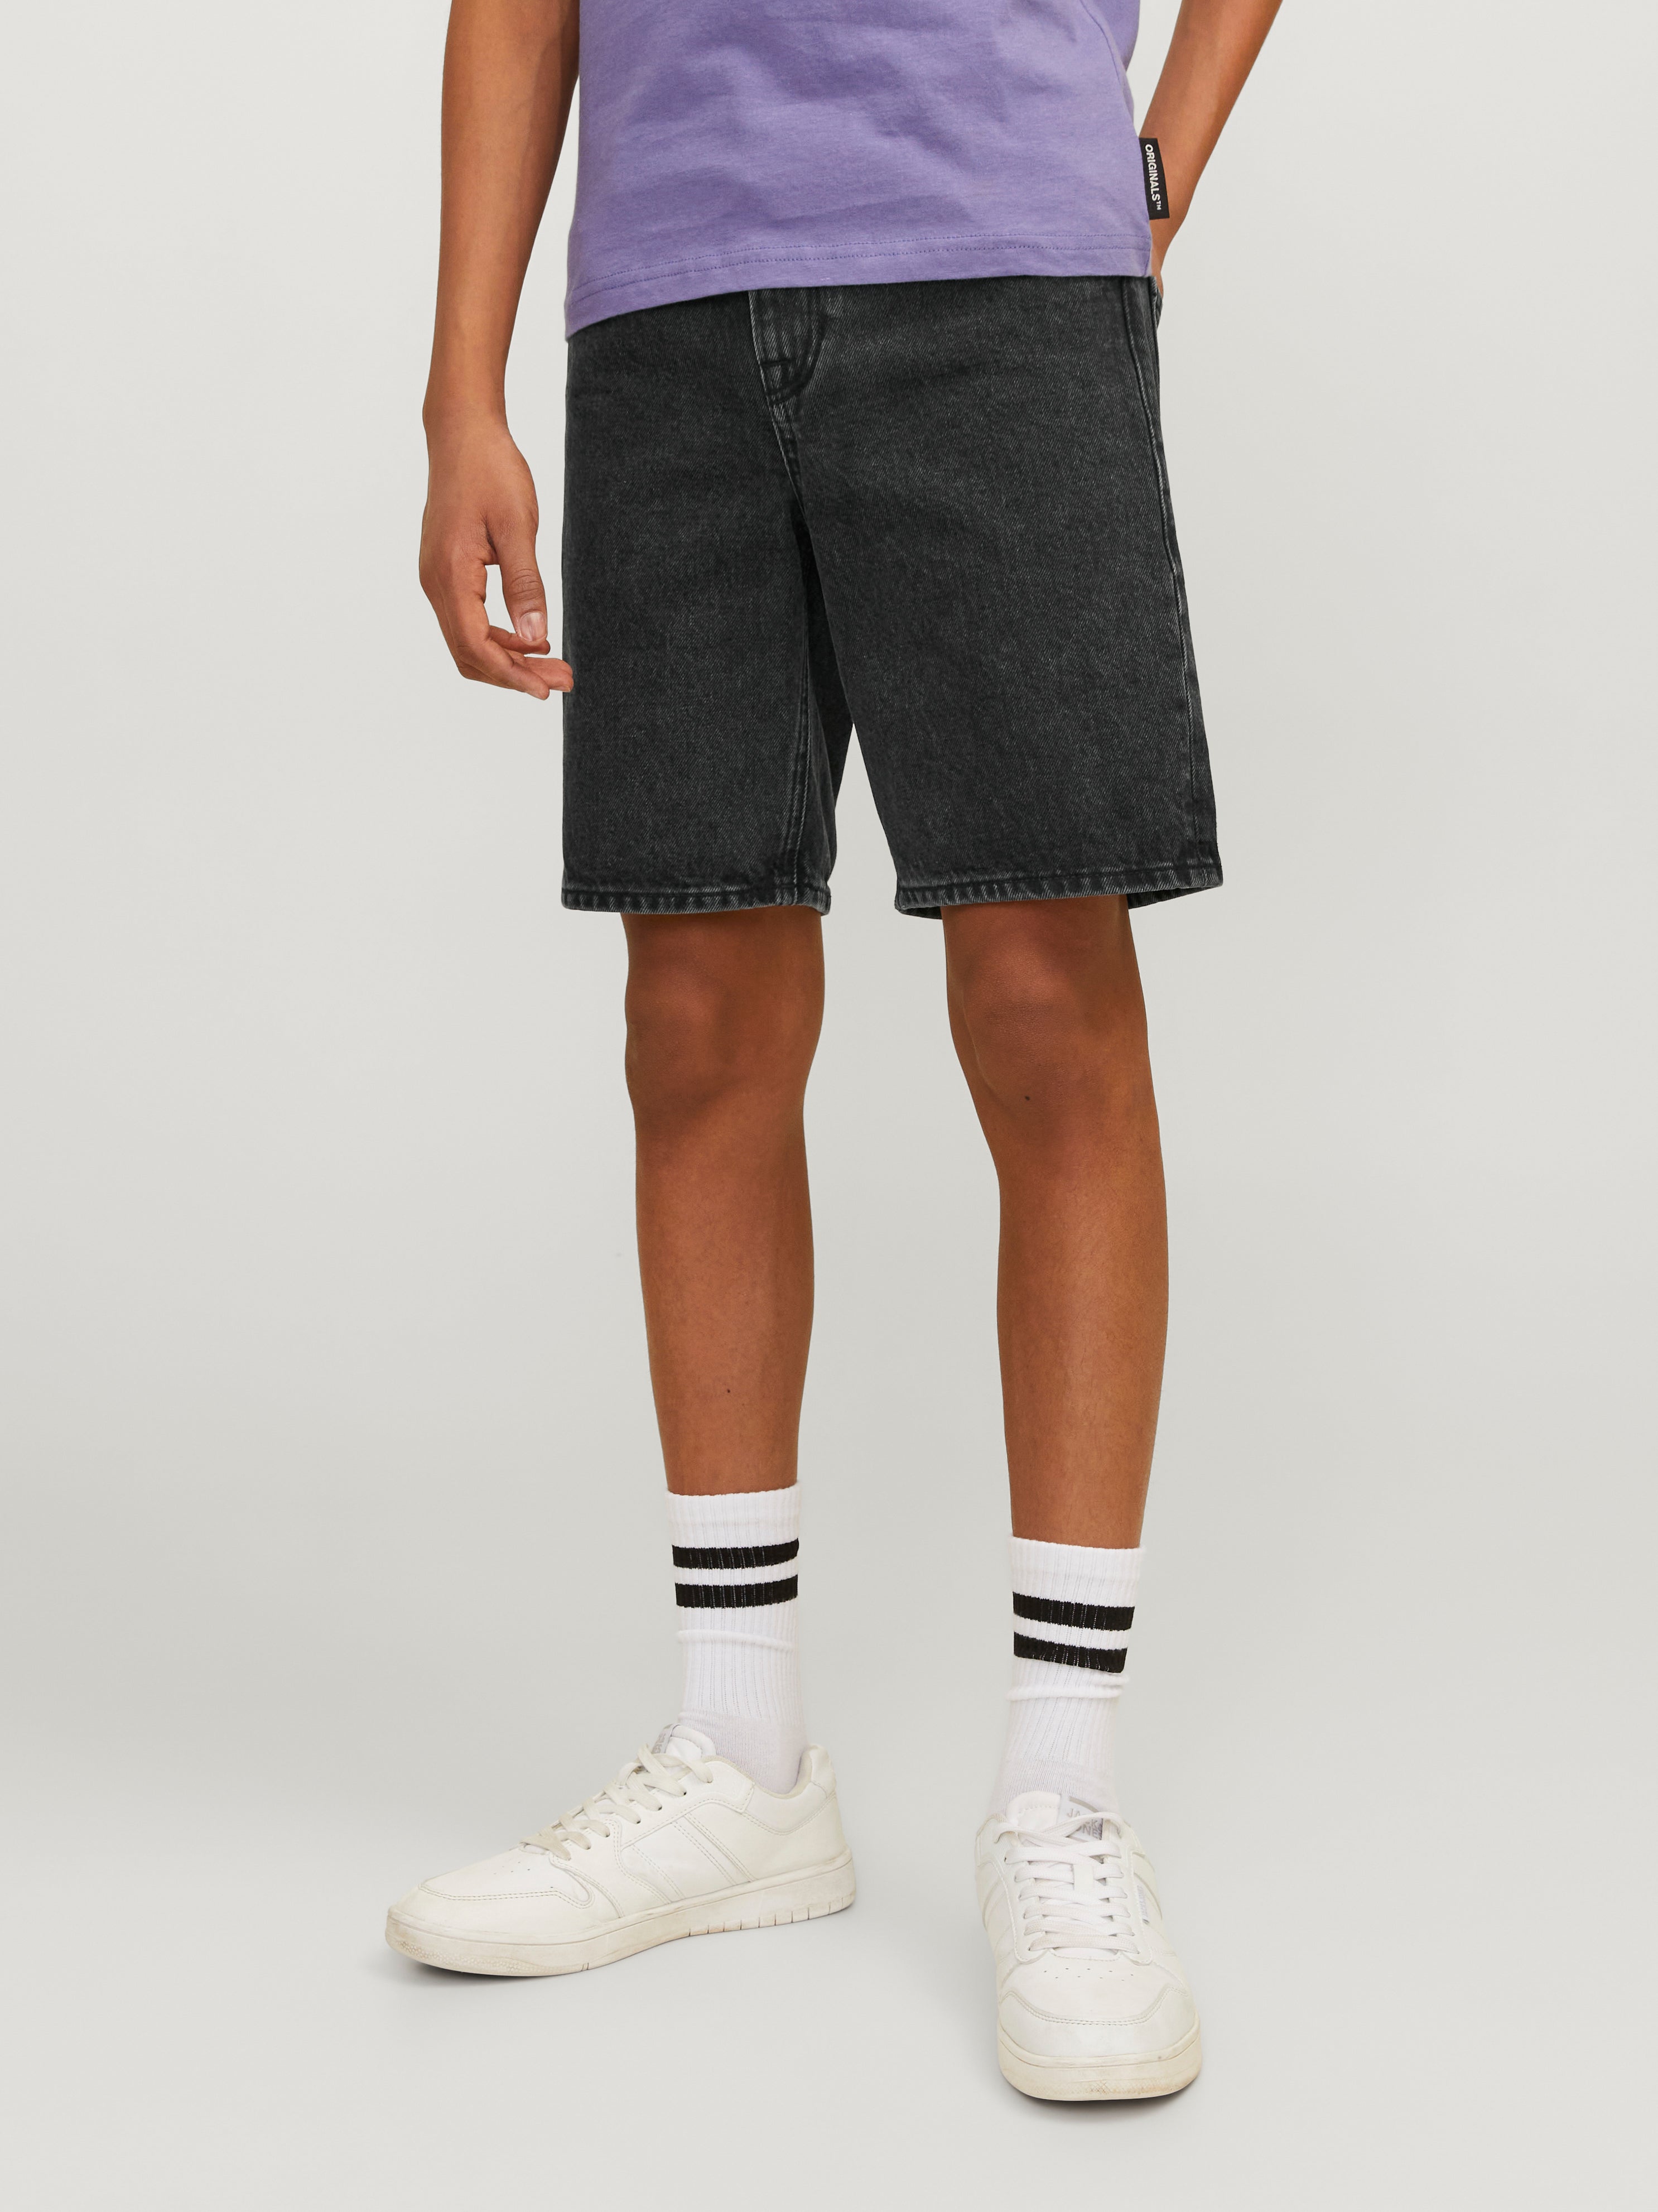 Relaxed Fit Lockere Shorts Für jungs